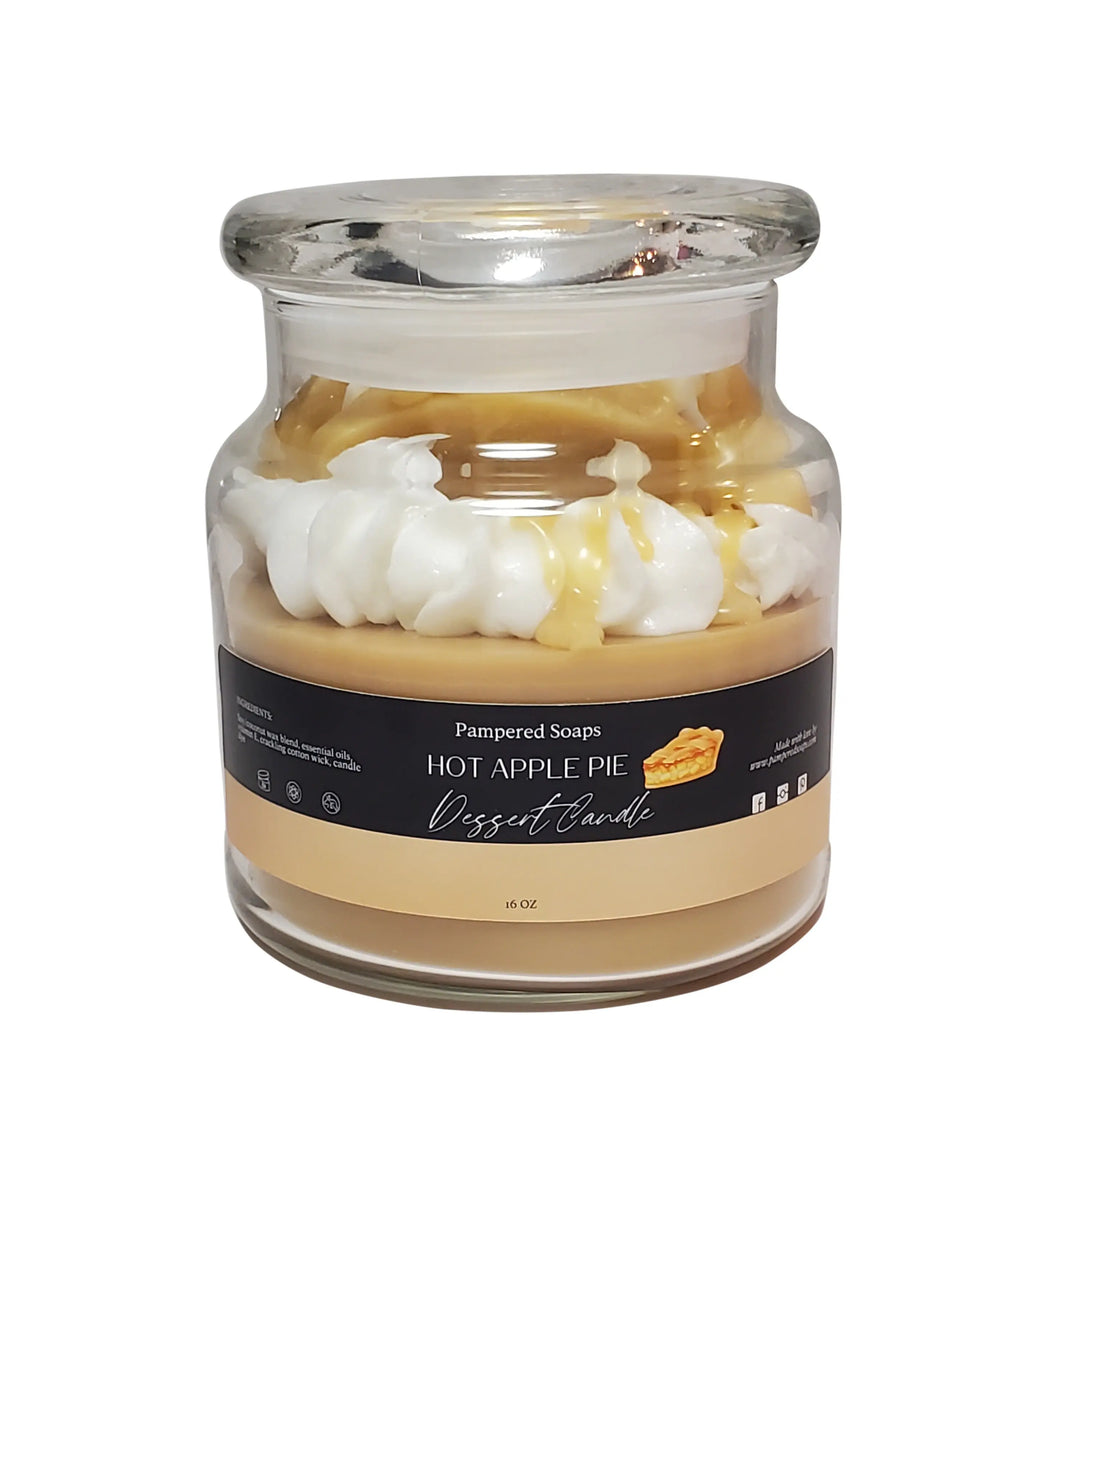 Dessert Candle Craze: From Hot Apple Pie to Chocolate Fudge